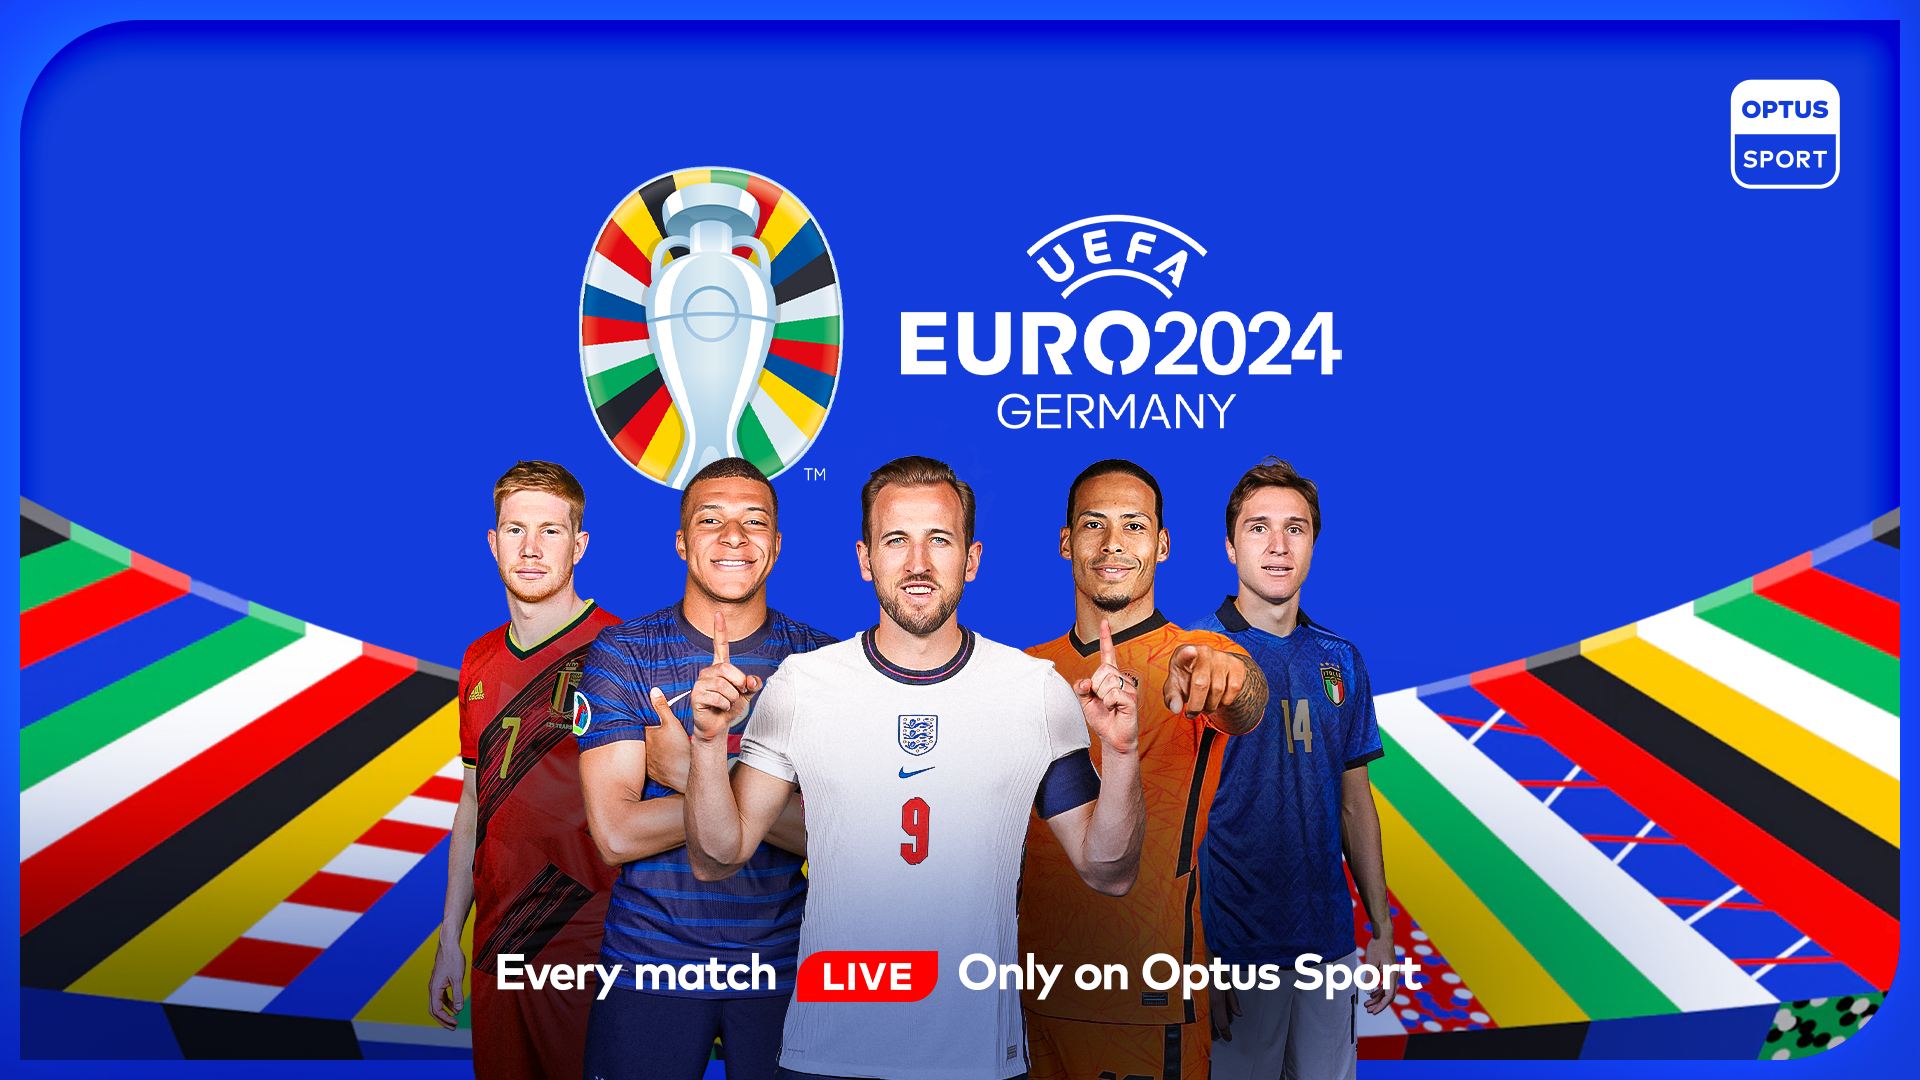  A promotional image for UEFA Euro 2024 showing five footballers from different countries who could be surprise stars of the tournament.